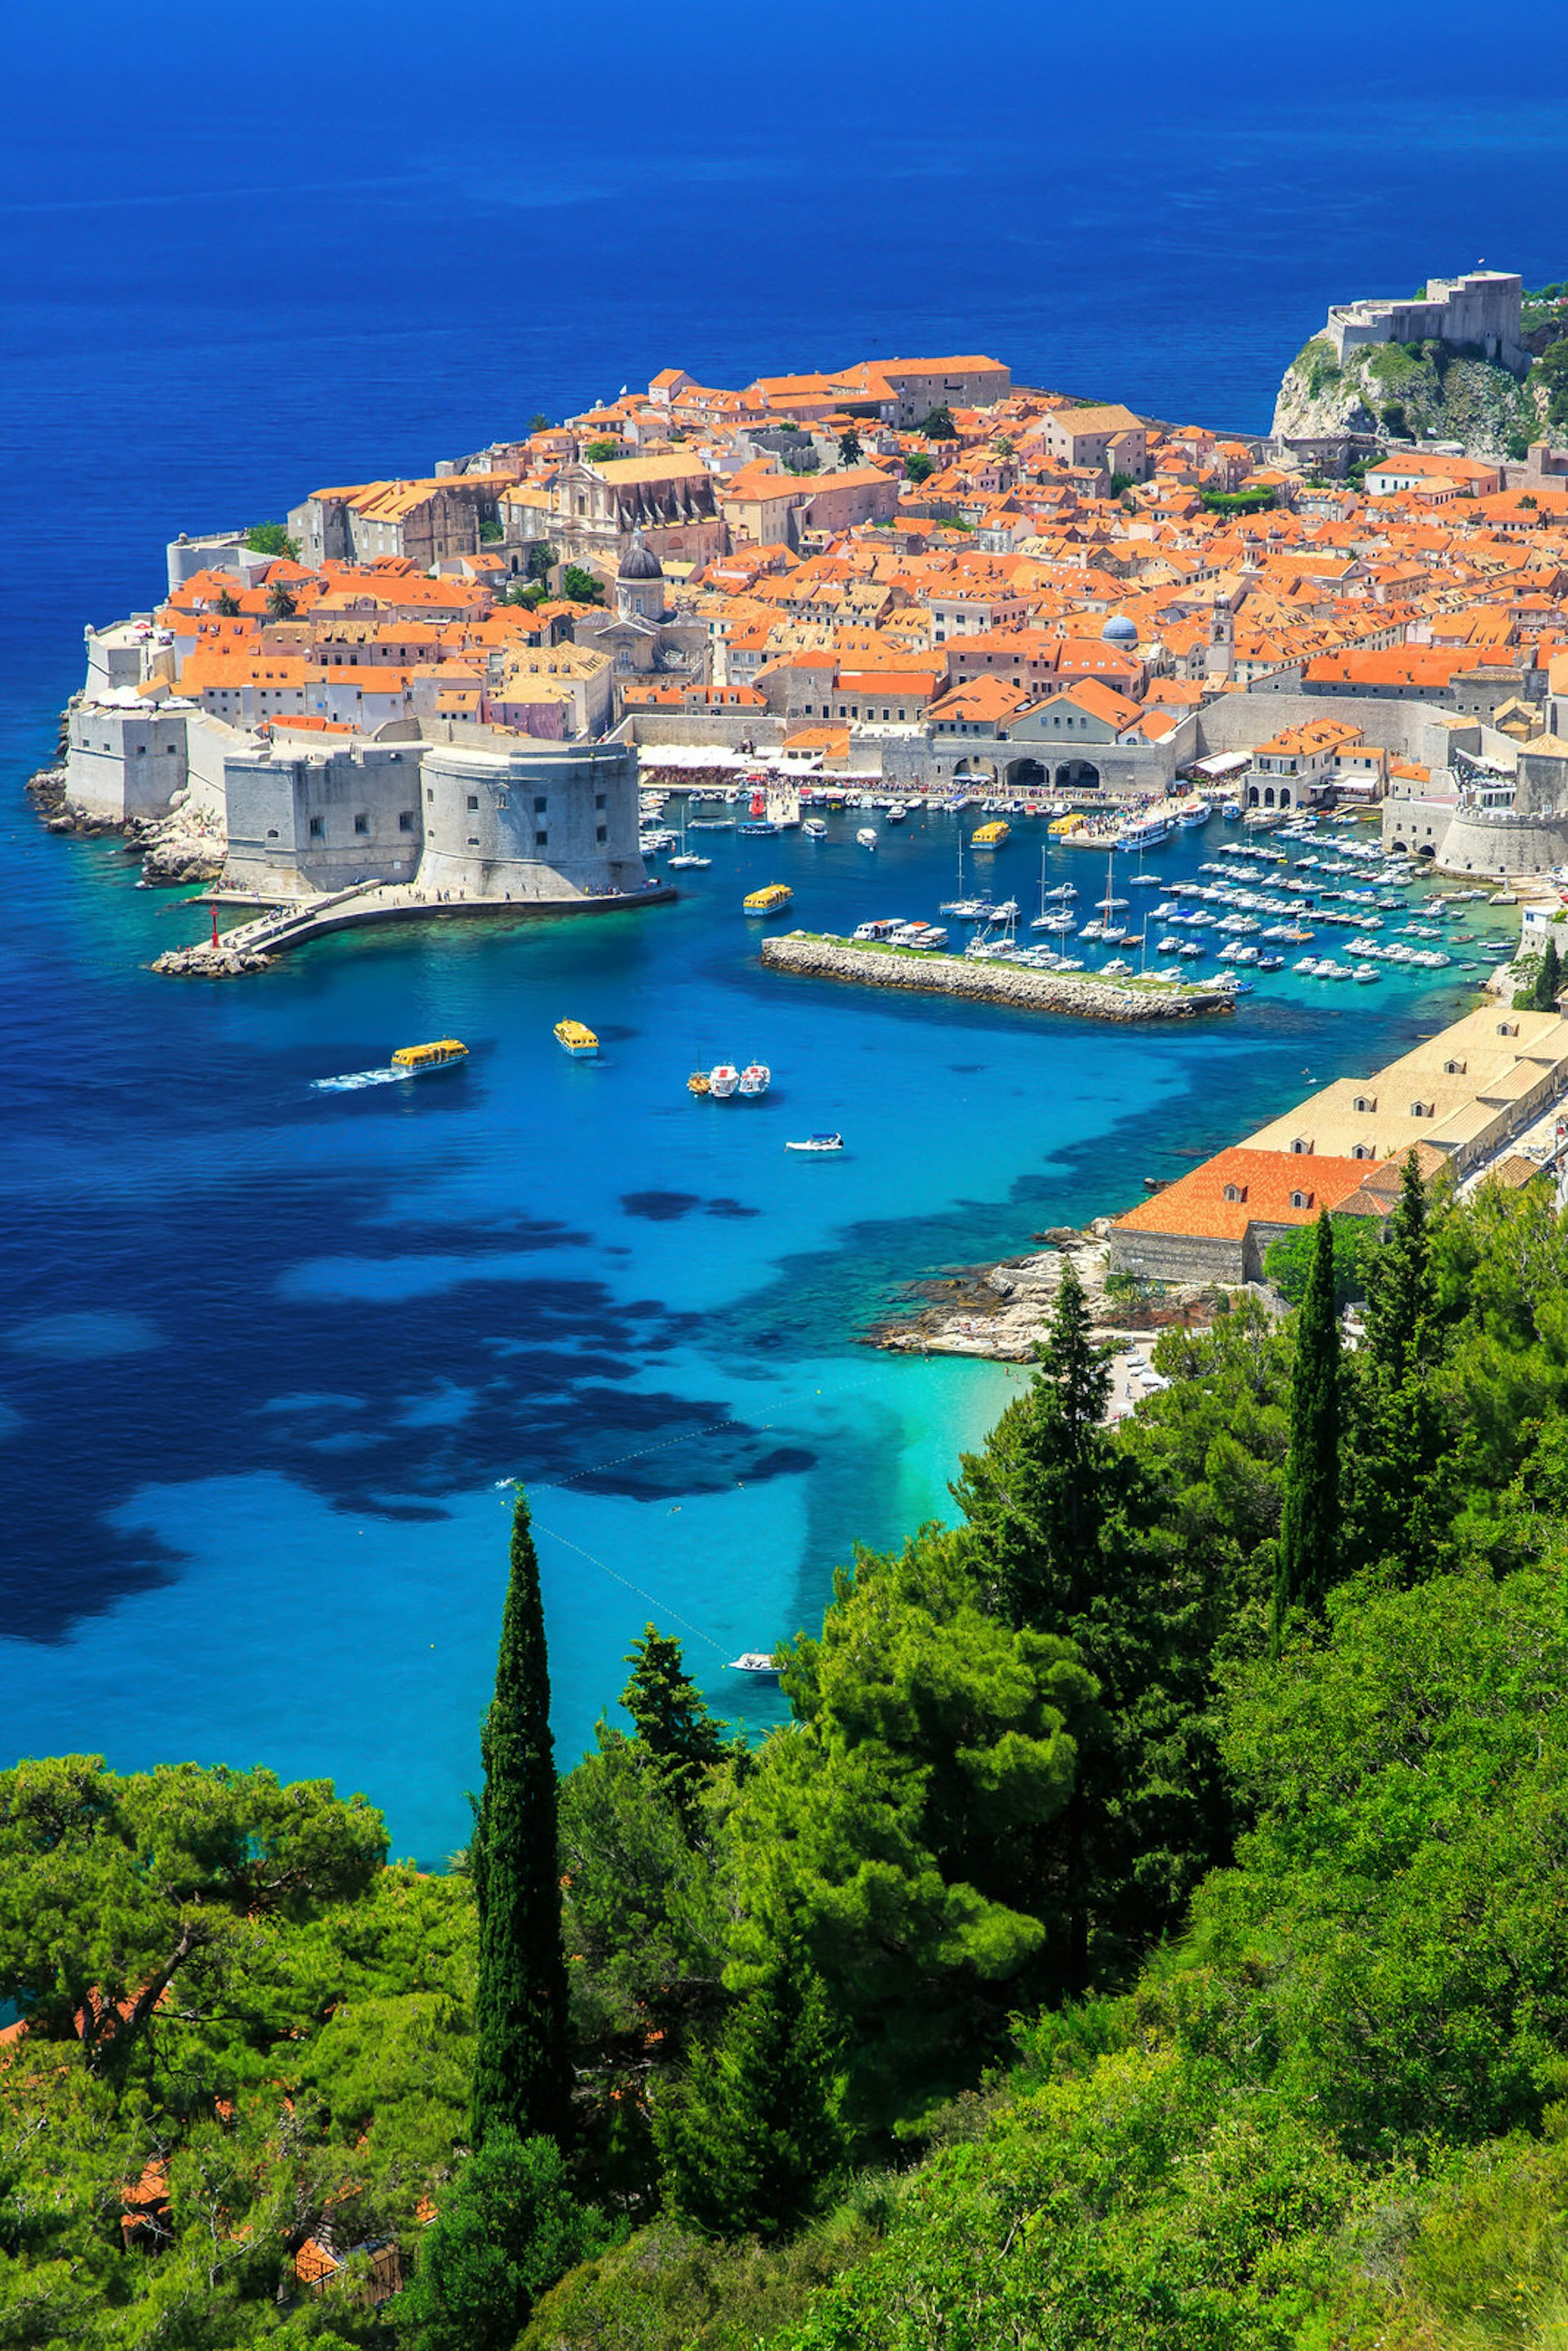 Dubrovnik is a great place to start your island-hopping trip